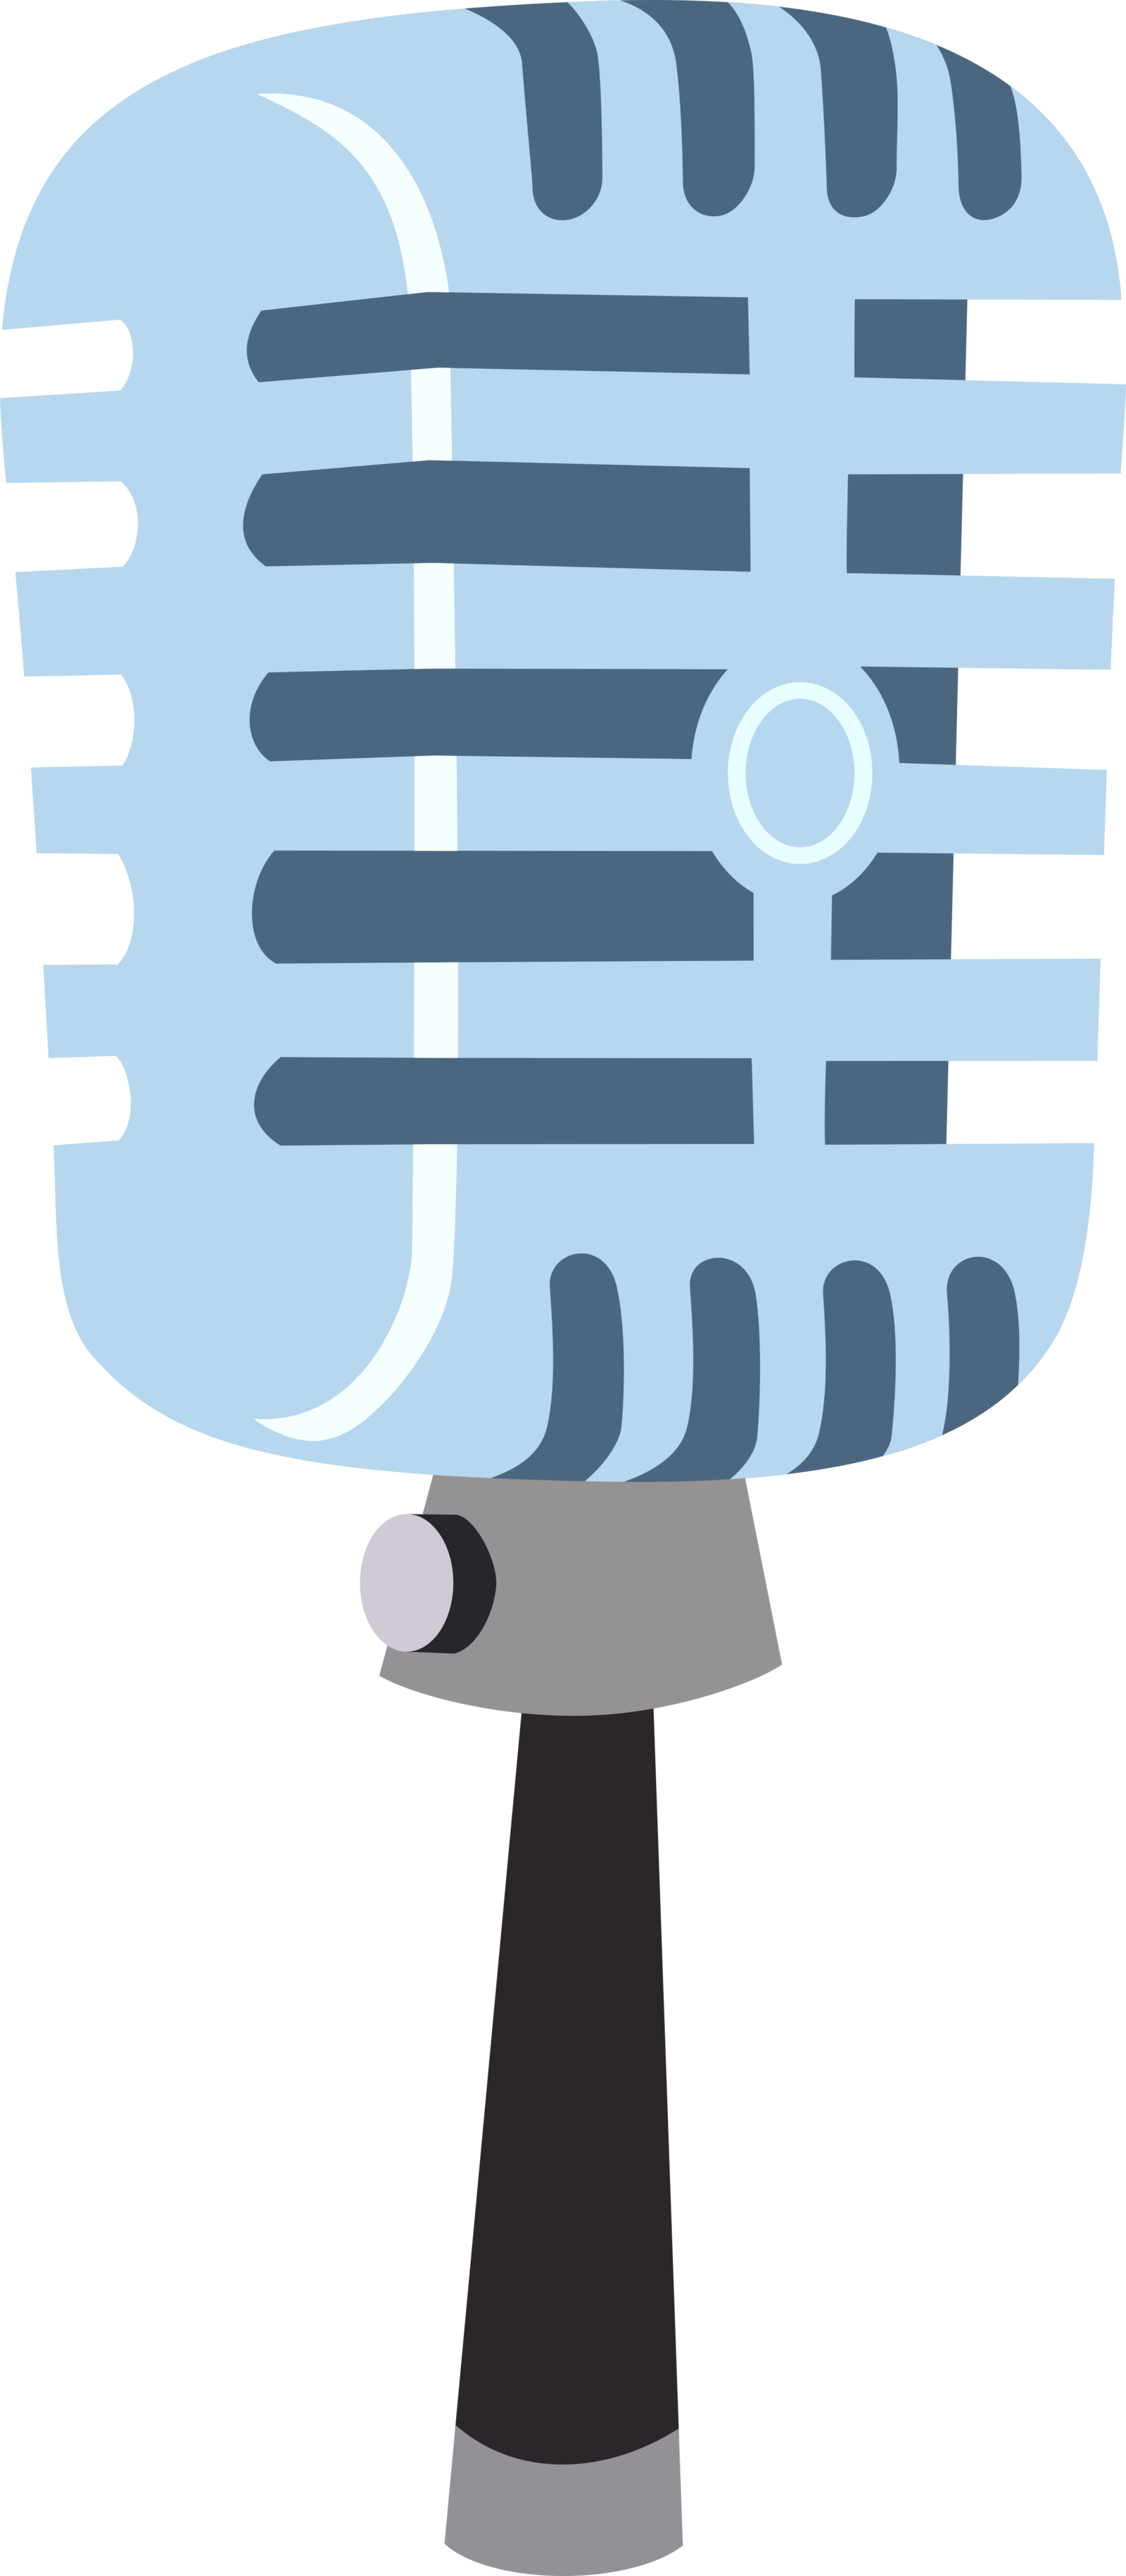 microphone illustration vector free download